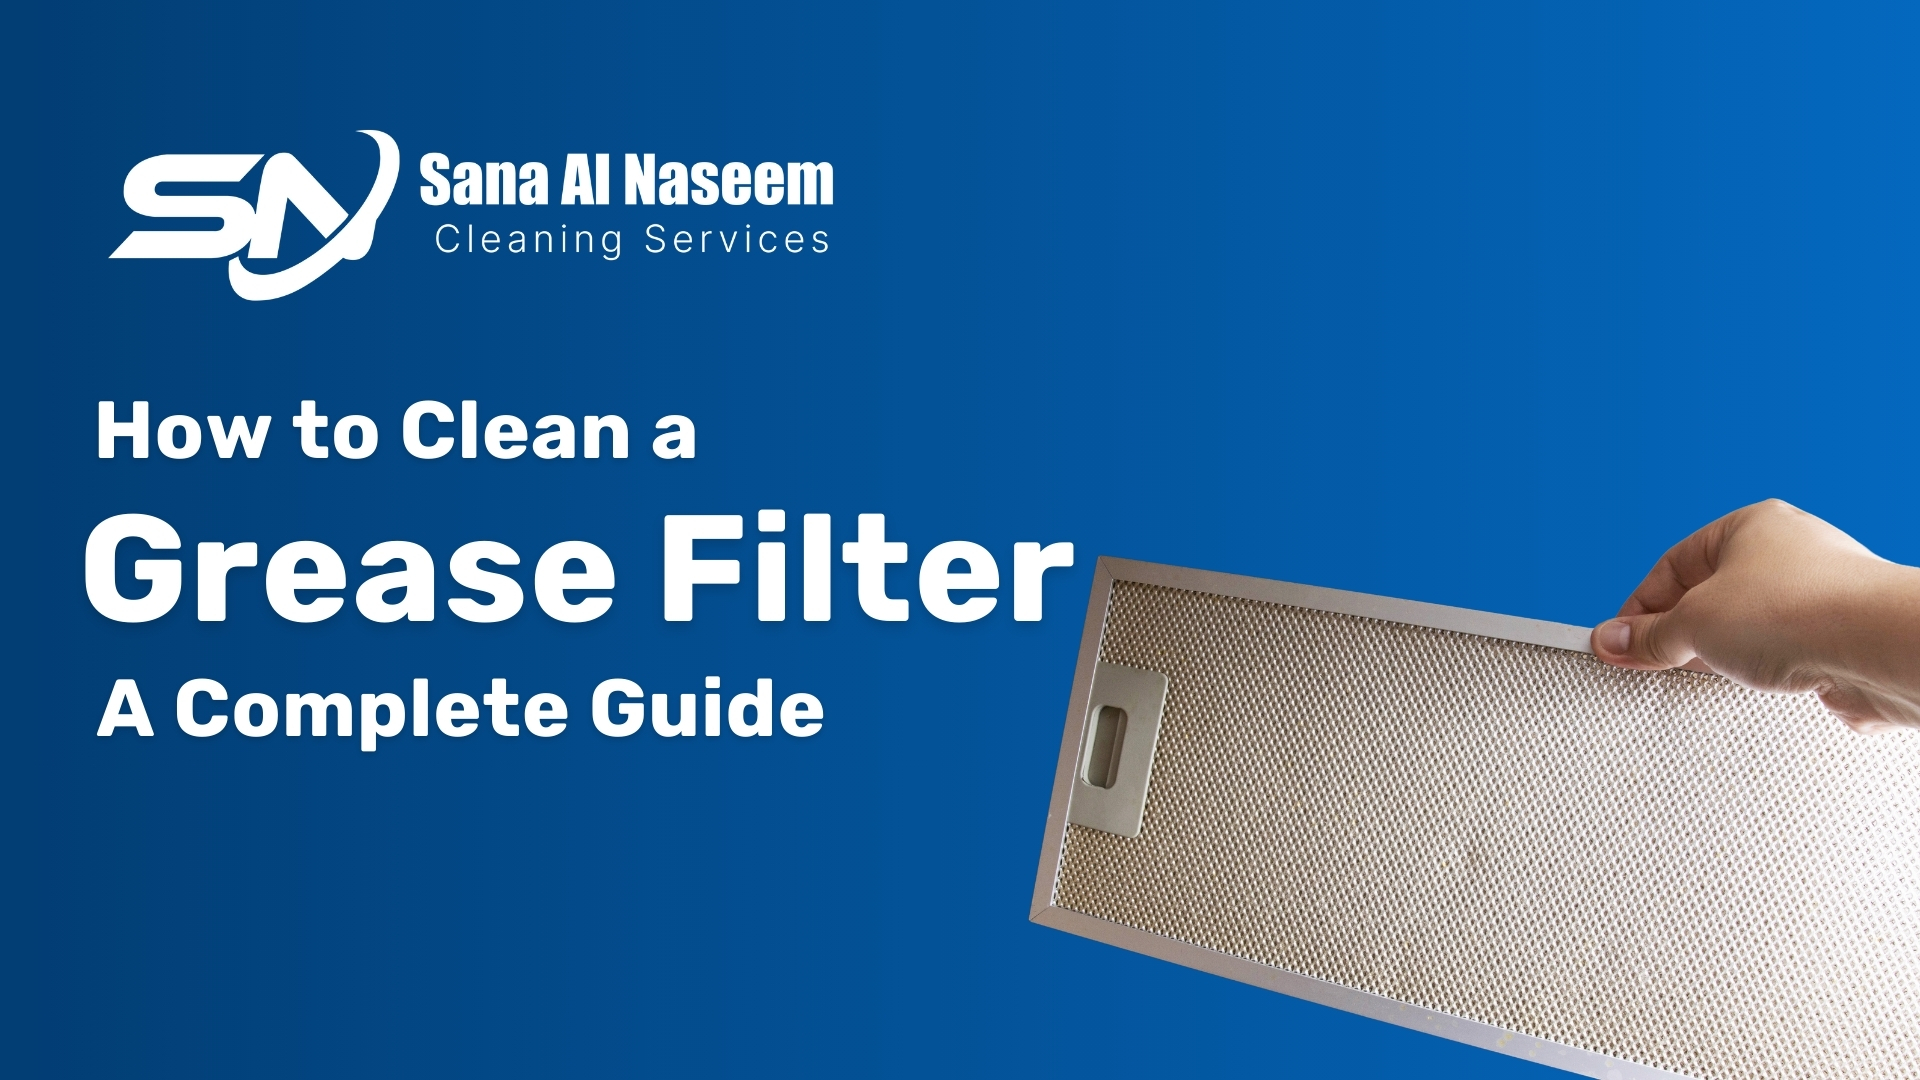 How to Clean a Grease Filter A Complete Guide